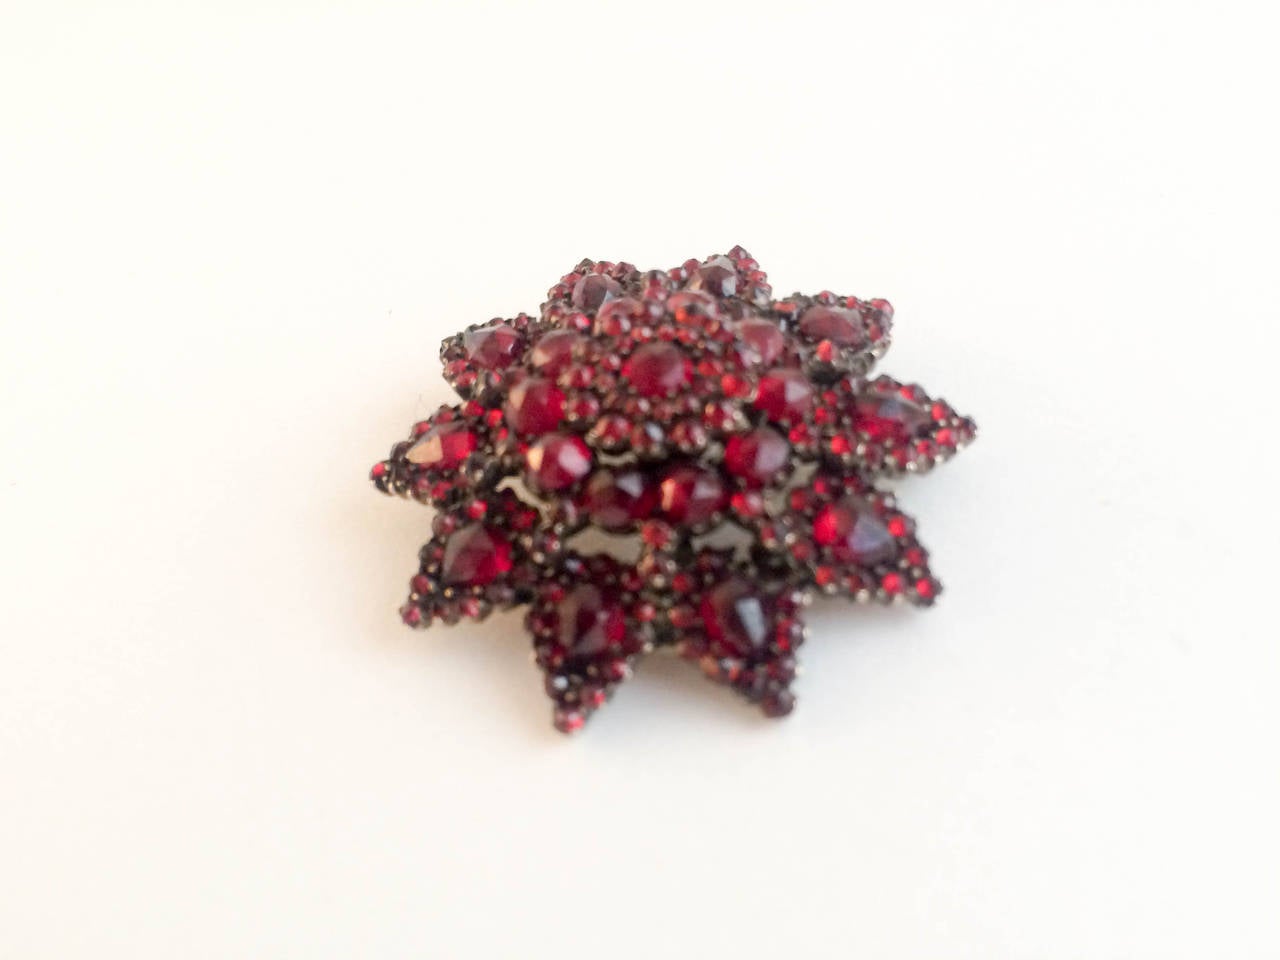 Stunning Garnet Brooch dating back from the 19th Century, circa 1860. Stones are beautiful with a very deep red colour. 

STYLE: Victorian

CONDITION: Pristine (please refer below to condition chart for more information)

ORIGIN: Bohemian